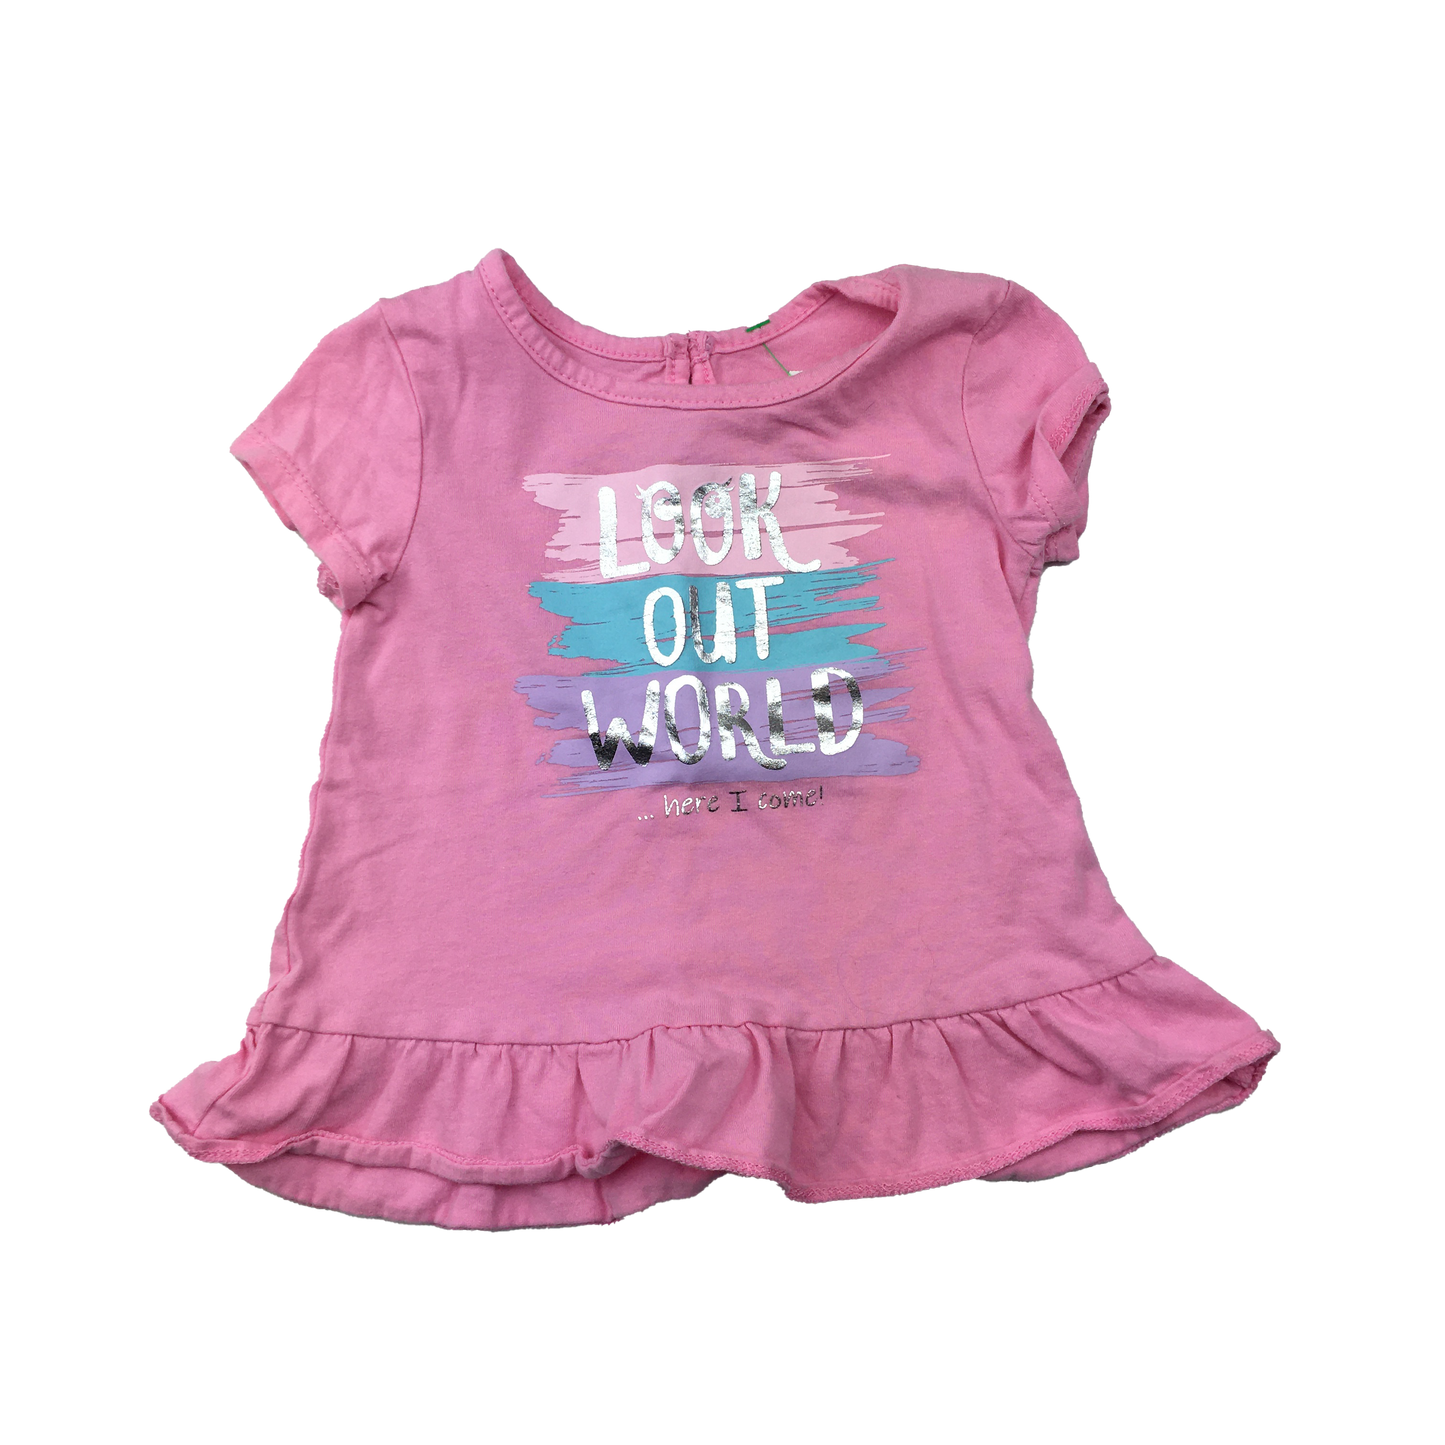 George Pink T-Shirt "Look Out World" 6-12M